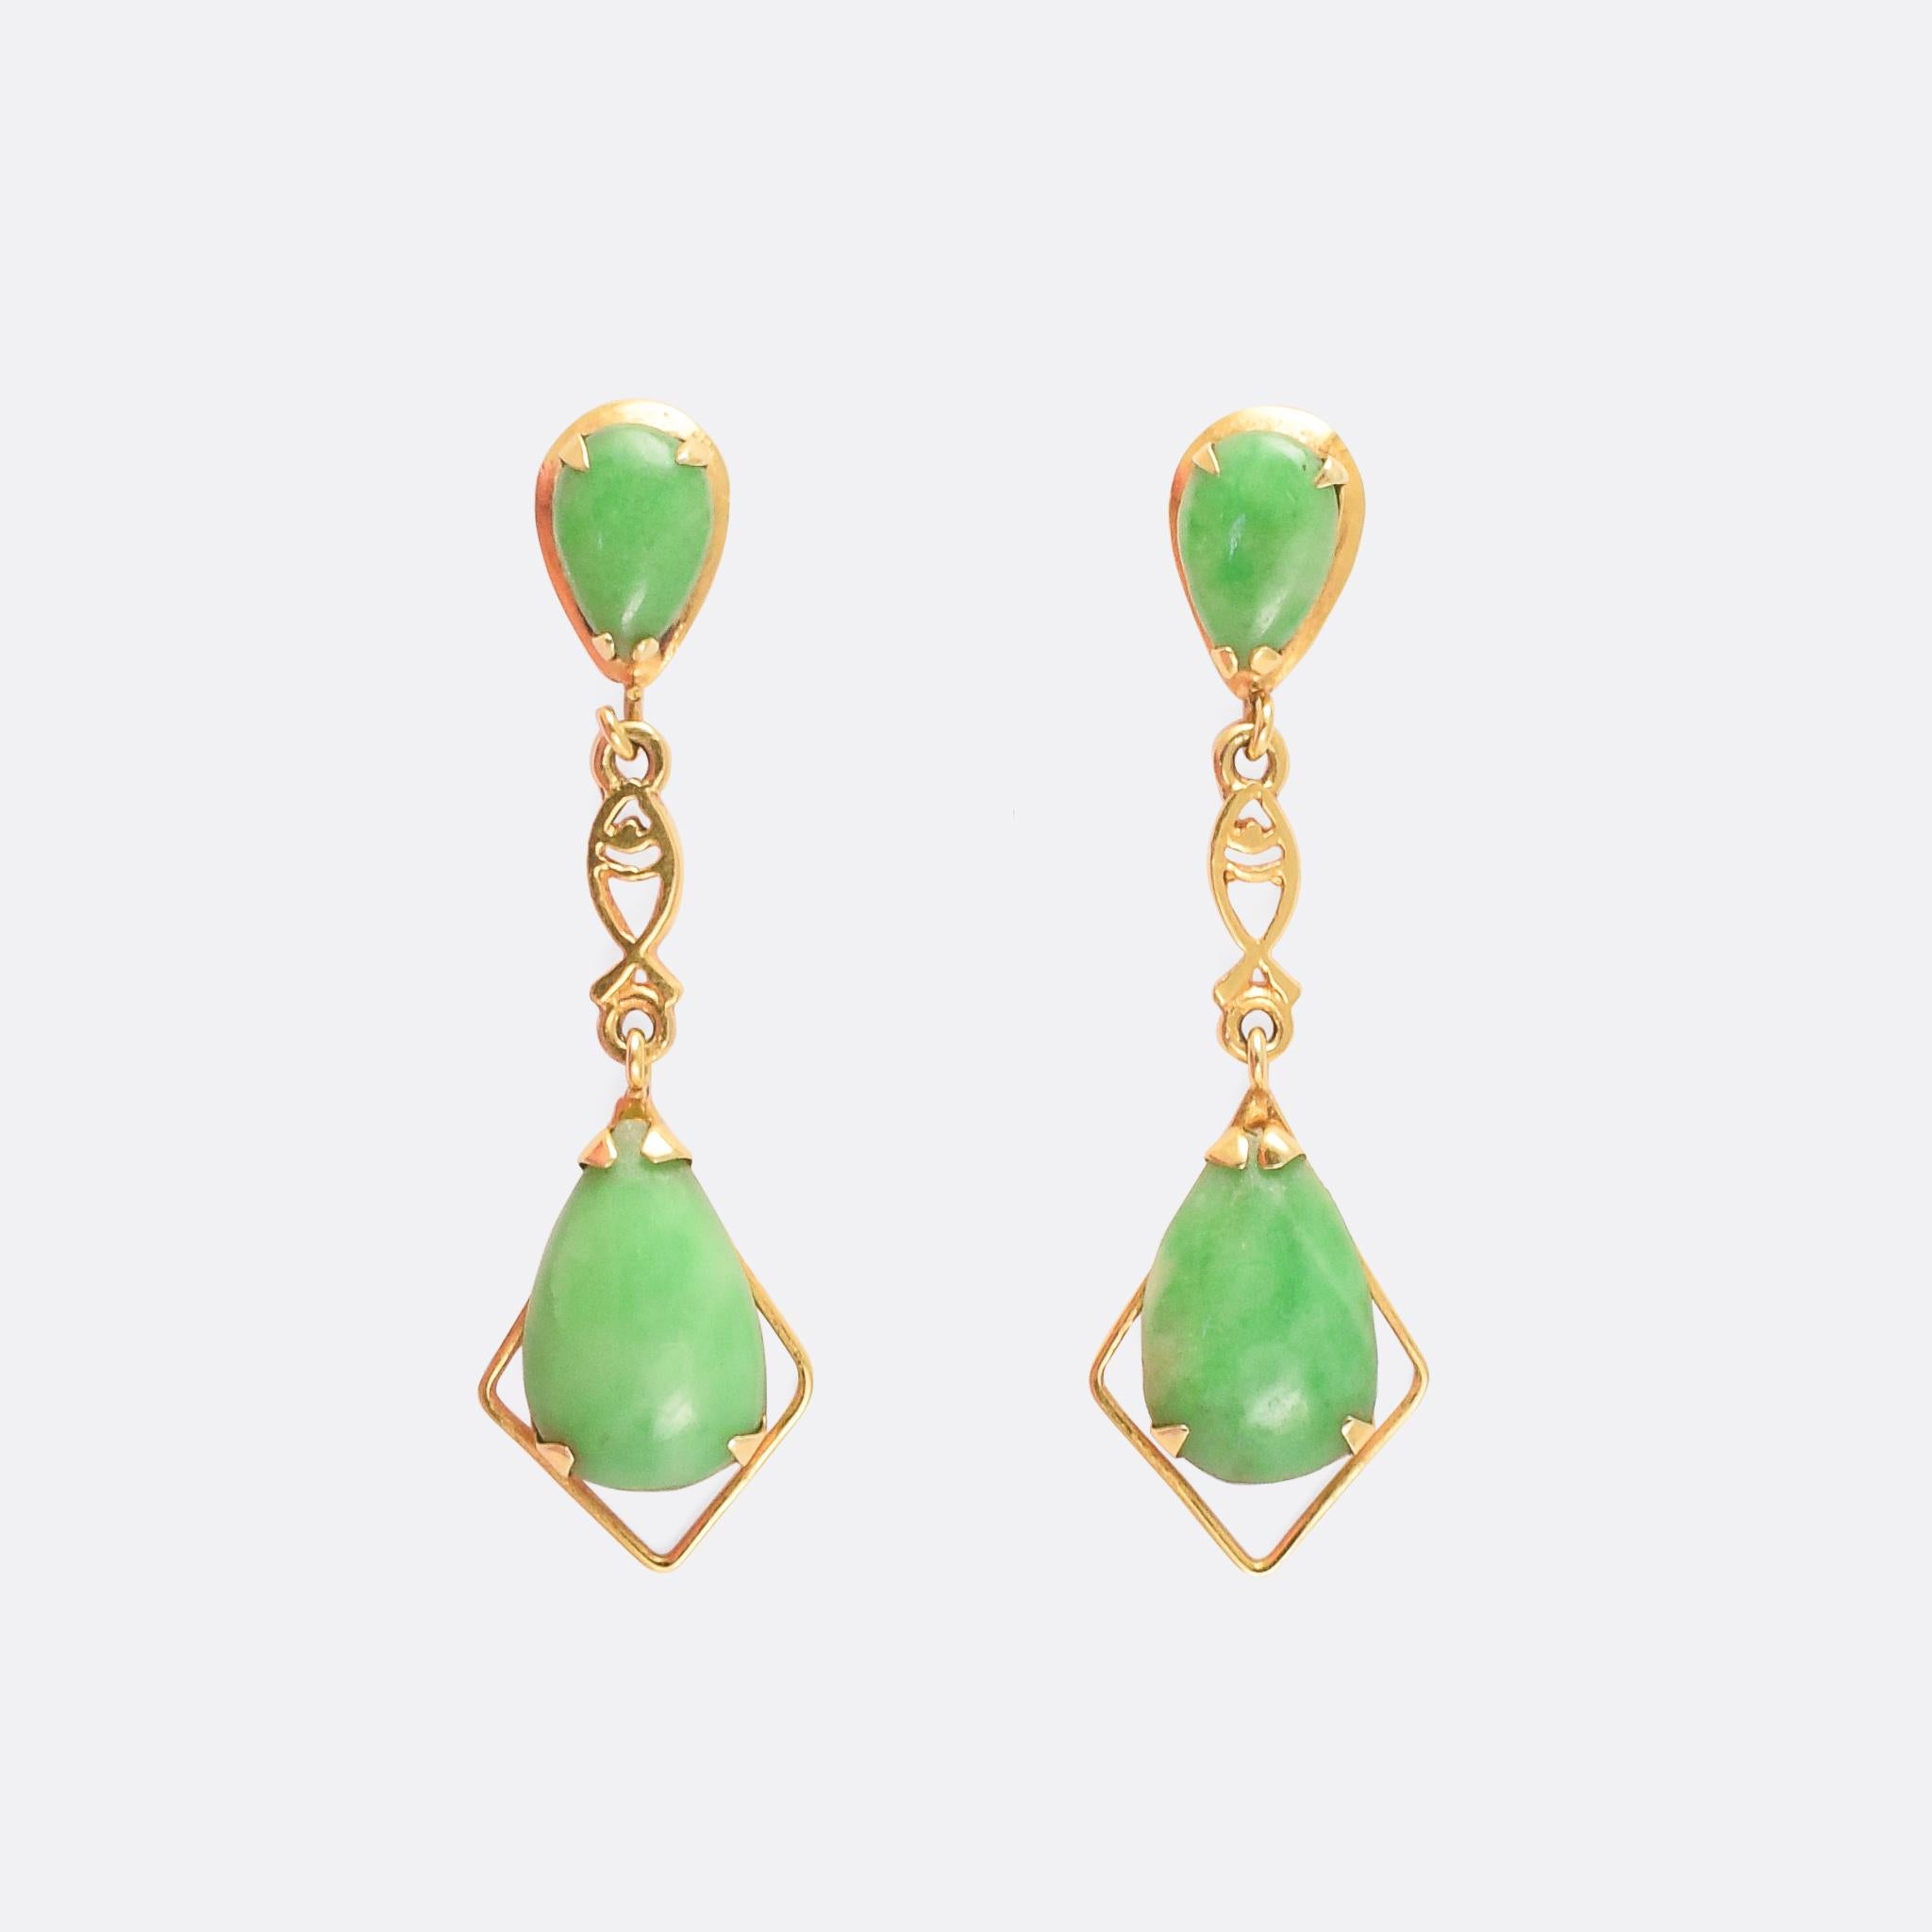 Beautiful vintage jade earrings dating from the 1970s. Each ear features two pear-shaped jade cabochons, mounted in 14k gold with little fish motifs between the stones. A gorgeous look: pretty and understated.

STONES 
Jade cabochons

MEASUREMENTS